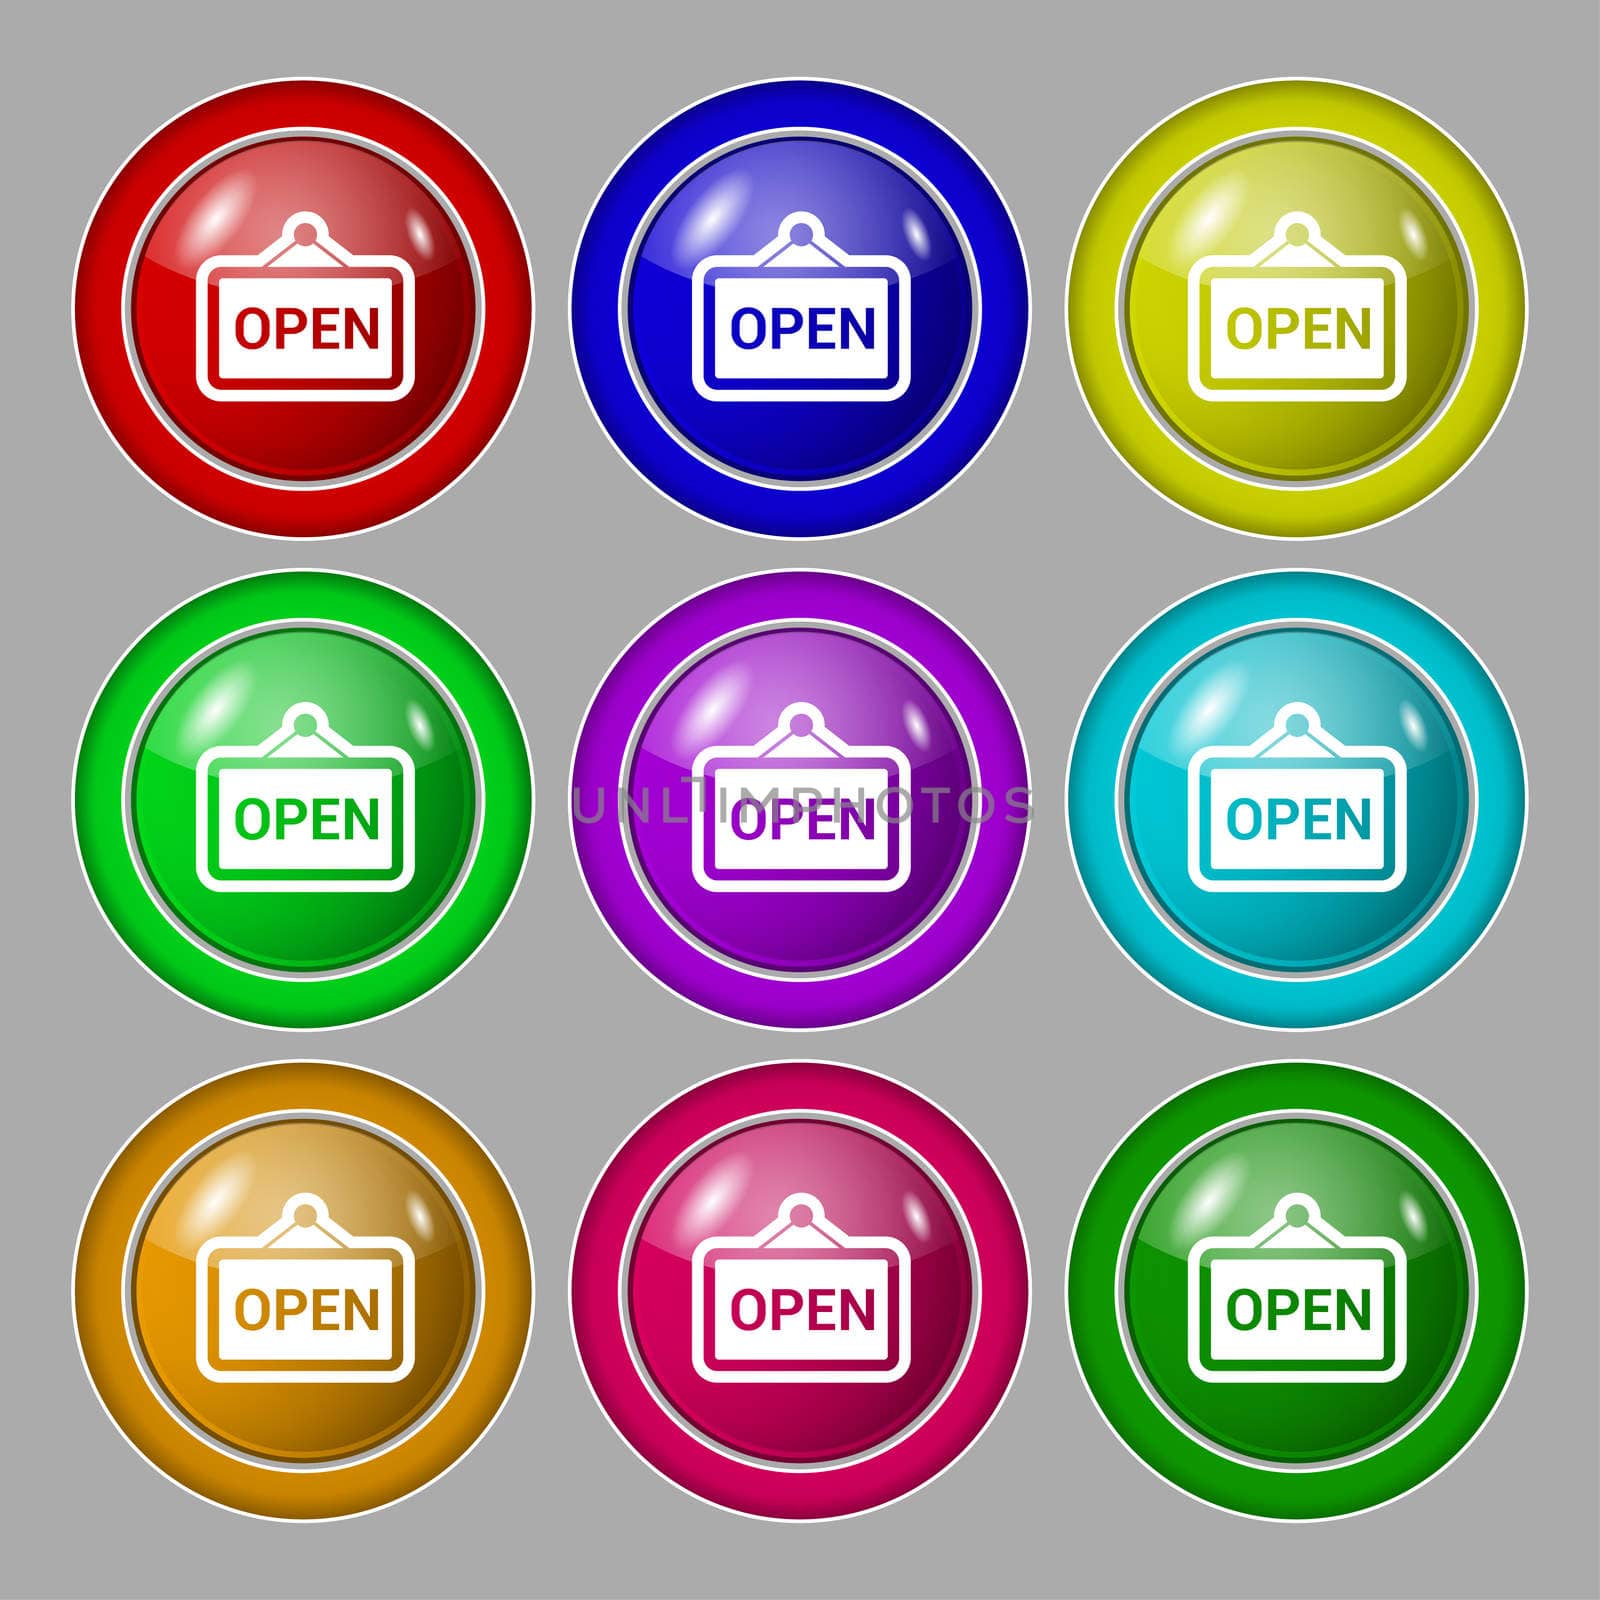 open icon sign. symbol on nine round colourful buttons. illustration